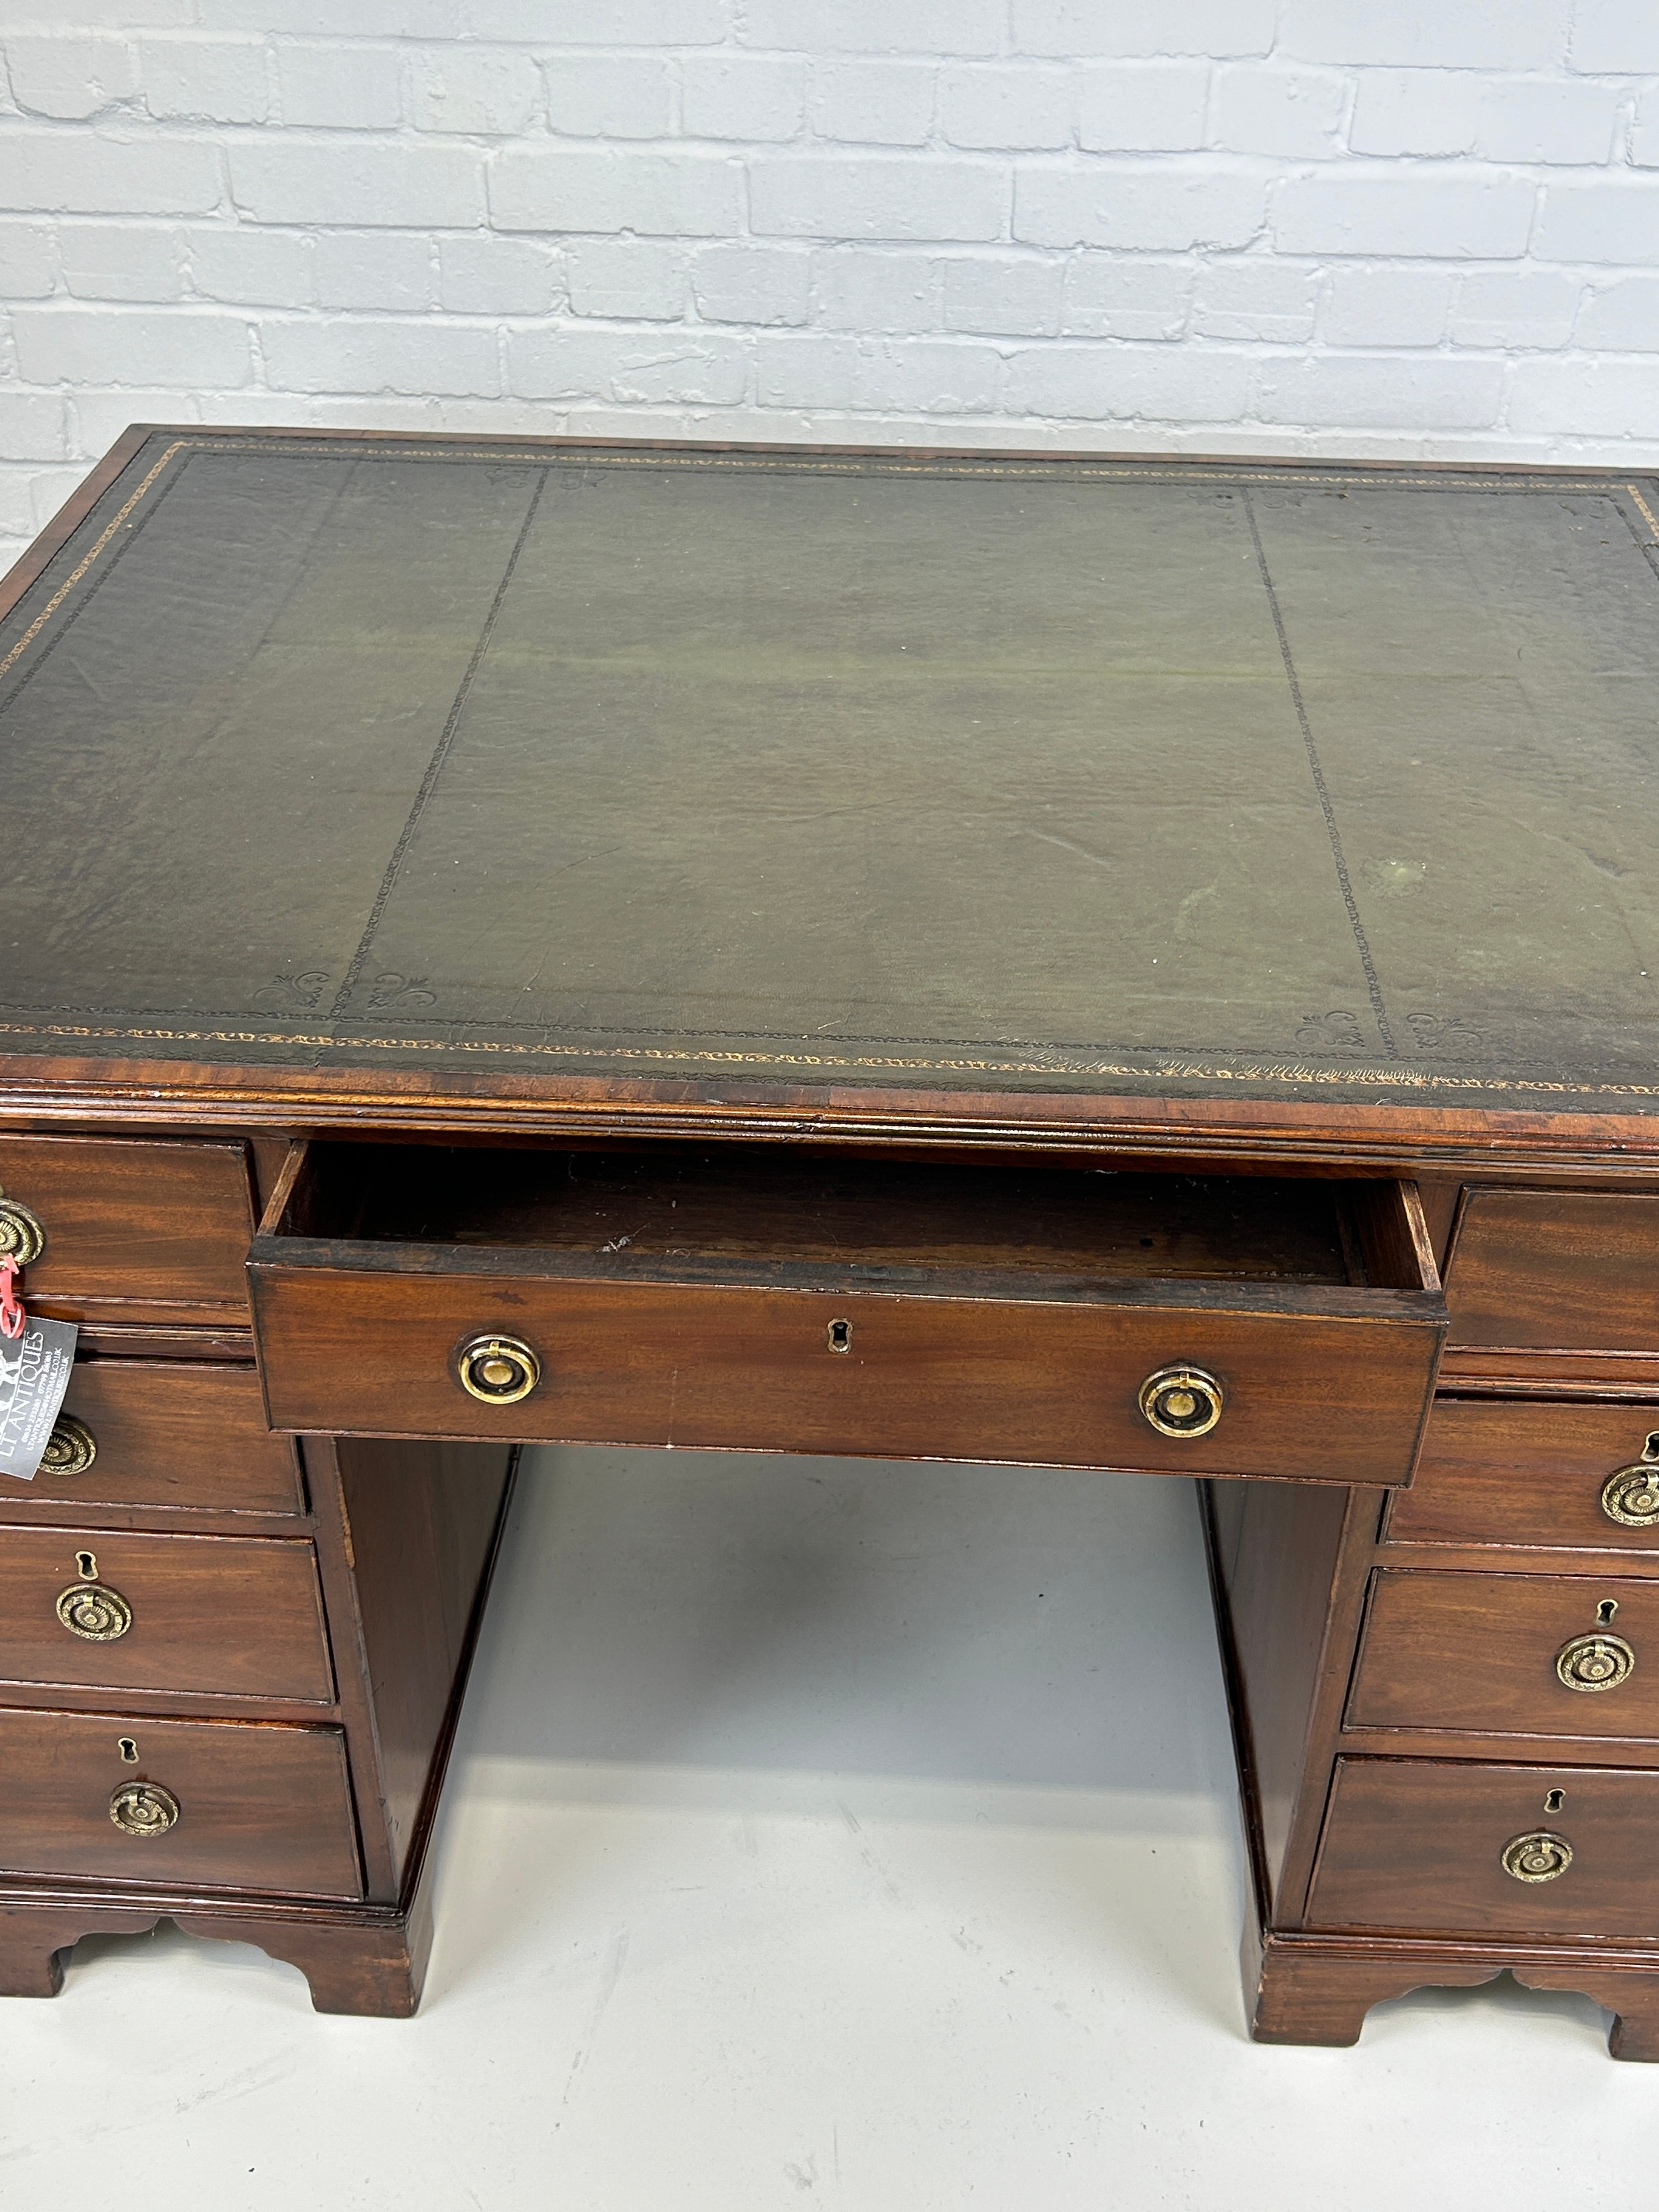 AN EARLY 19TH CENTRAL PARTNERS DESK, Two pedestals, each with ten drawers with brass handles. - Image 9 of 12